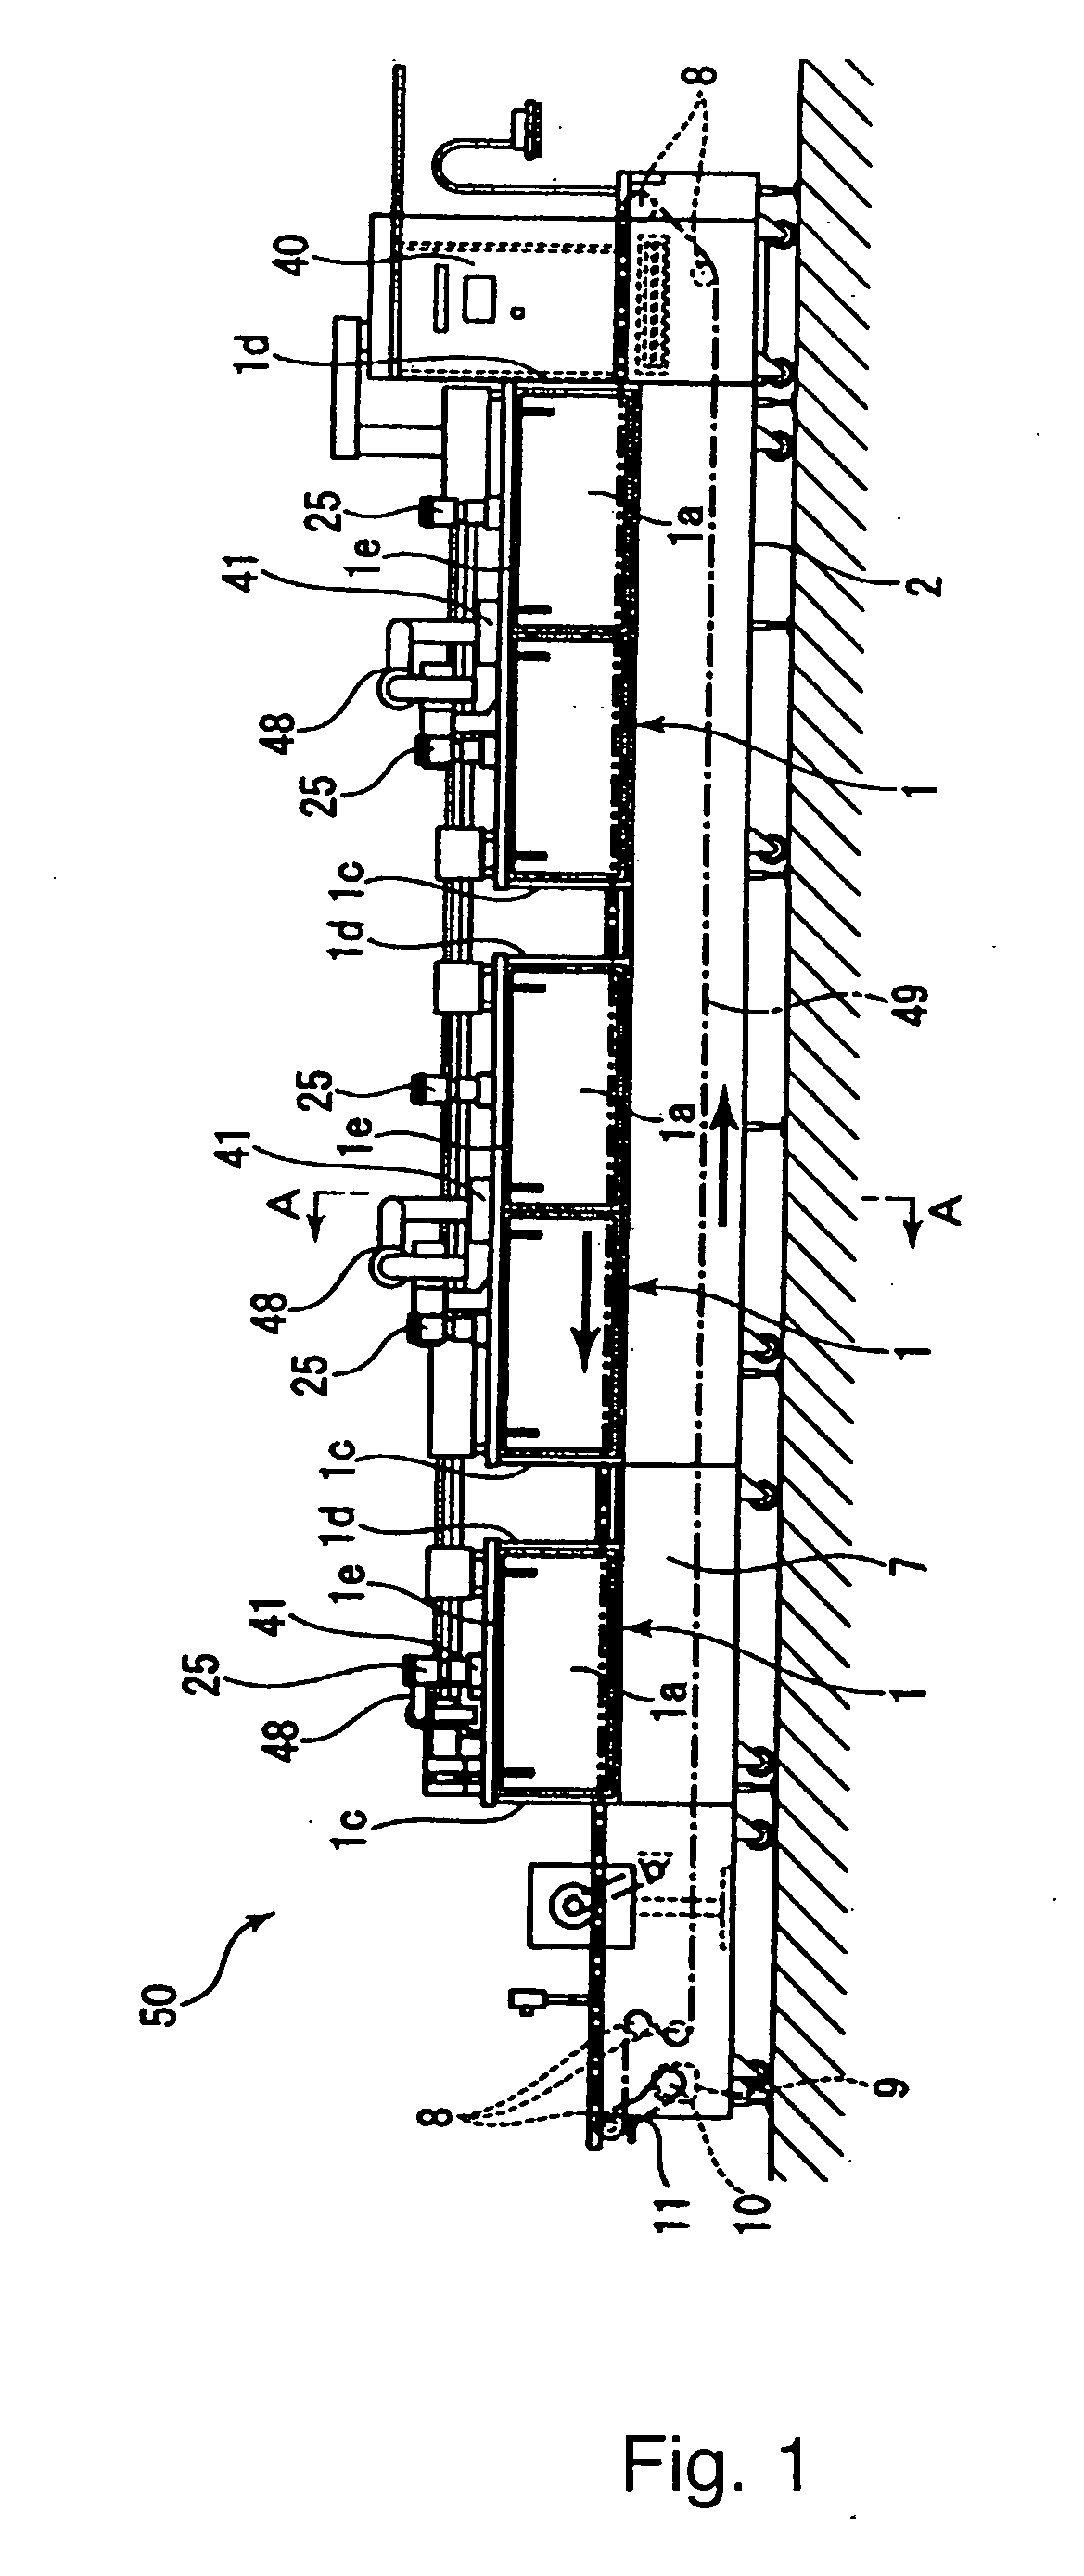 Apparatus for Cooking Food